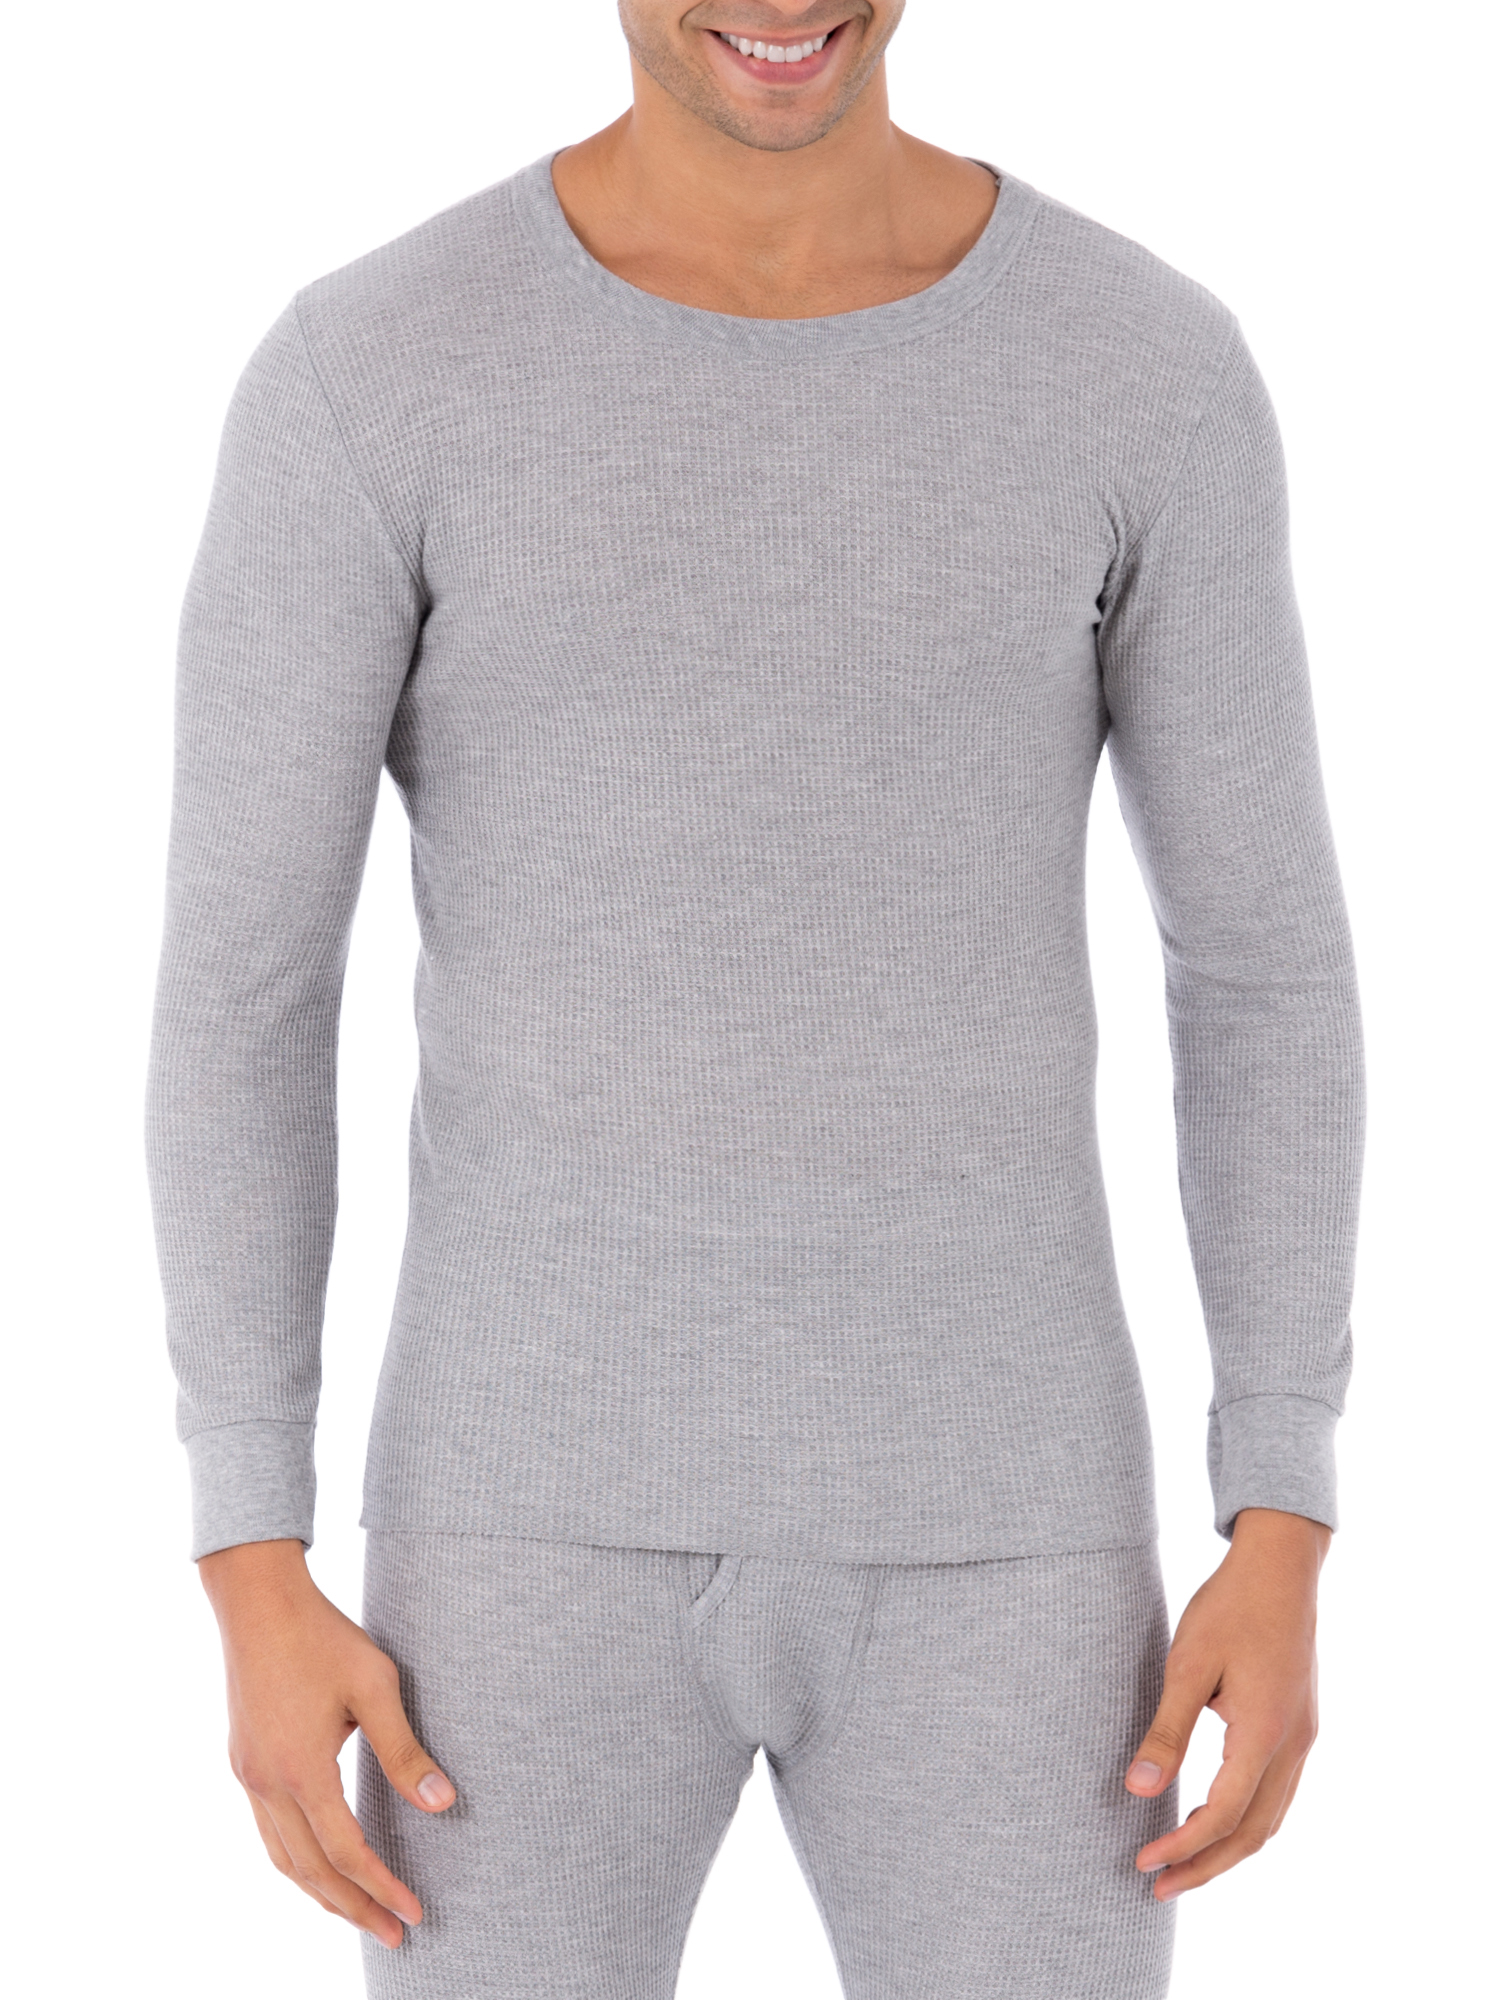 Fruit of the Loom SUPER VALUE Men's Core Waffle Thermal 2 Pack Top - image 5 of 11